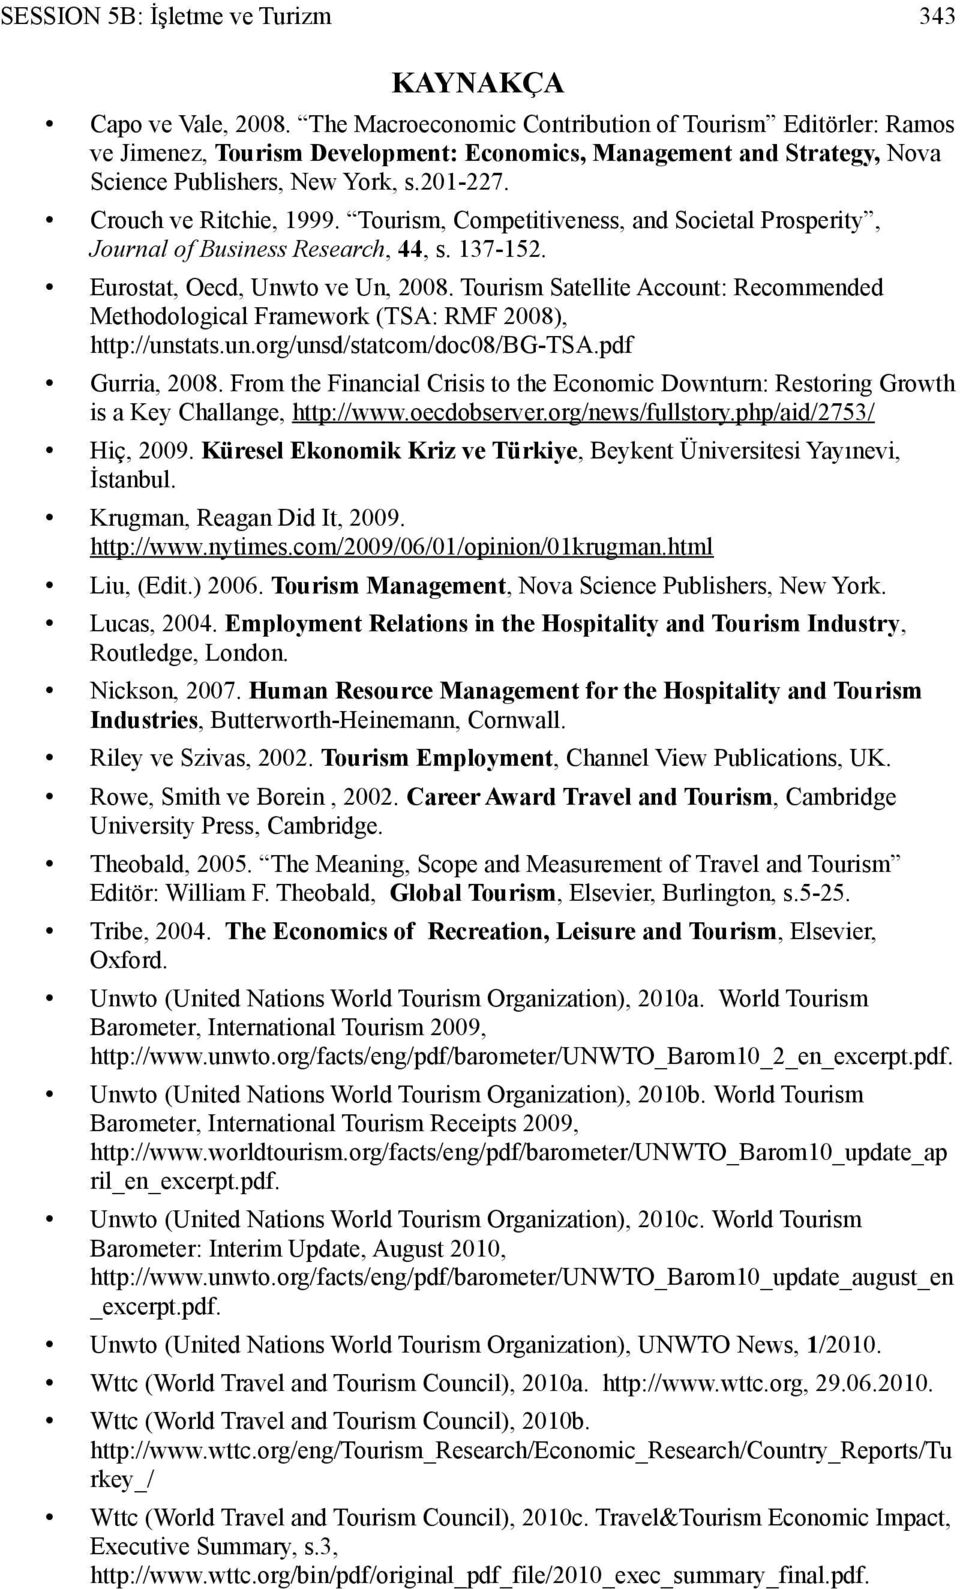 Tourism, Competitiveness, and Societal Prosperity, Journal of Business Research, 44, s. 137-152. Eurostat, Oecd, Unwto ve Un, 2008.